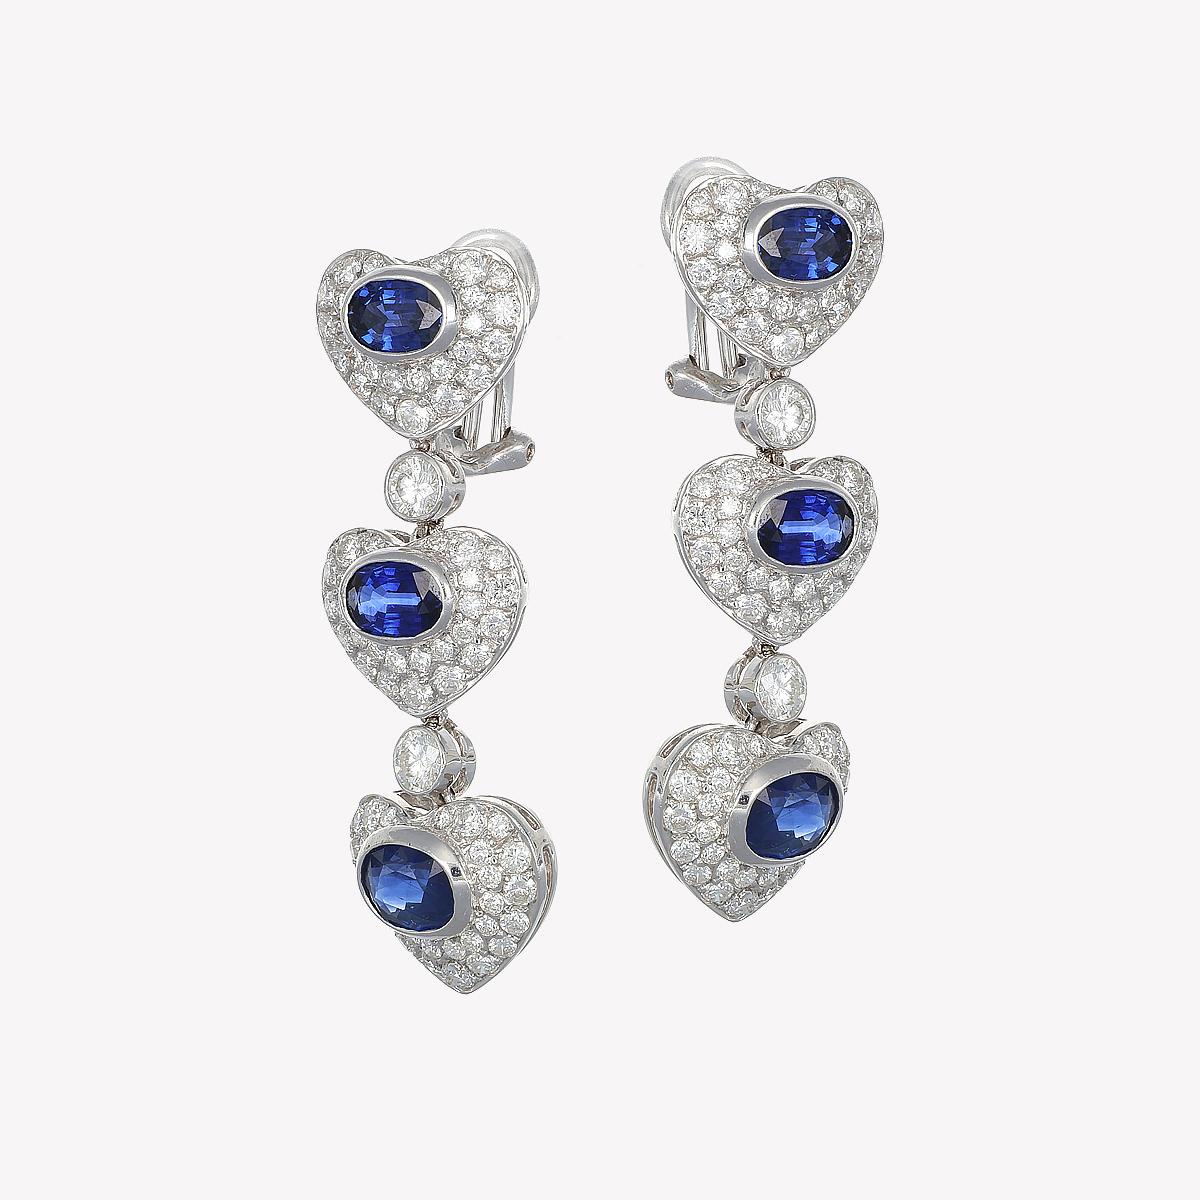 In the radiant embrace of these heart-shaped drop earrings, passion and promise merge into a design of loving hearts. The deep blue sapphires, as profound as the night's veil, are framed by pavé diamonds that shine with pure, vibrant light. Wearing